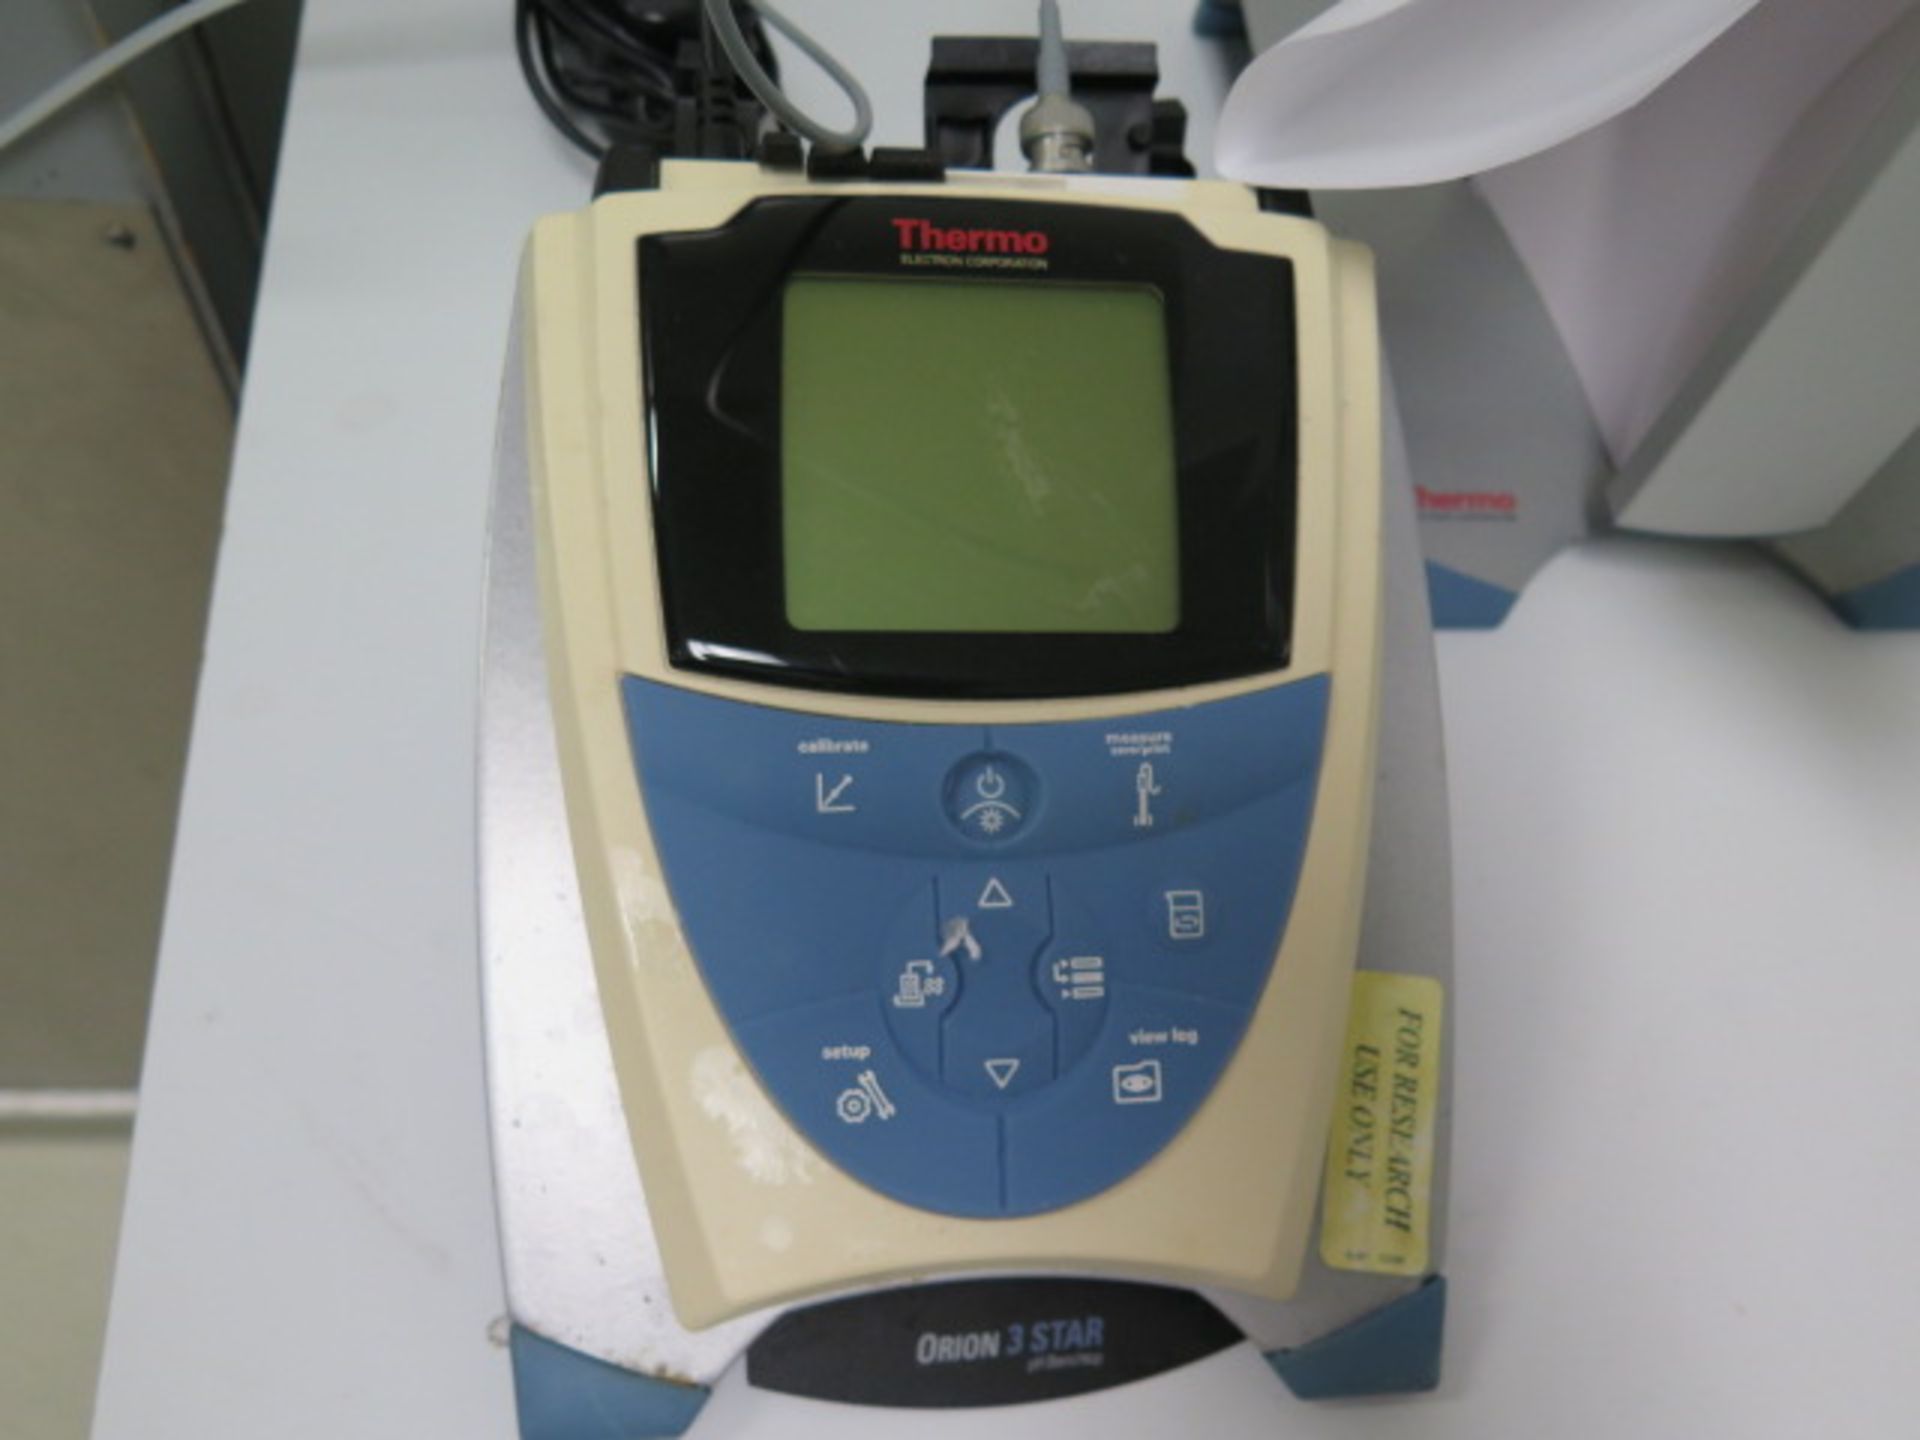 Thermo Electrin “Orion 3 STAR” Digital Benchtop pH Meter w/ Stand (SOLD AS-IS - NO WARRANTY) - Image 3 of 5